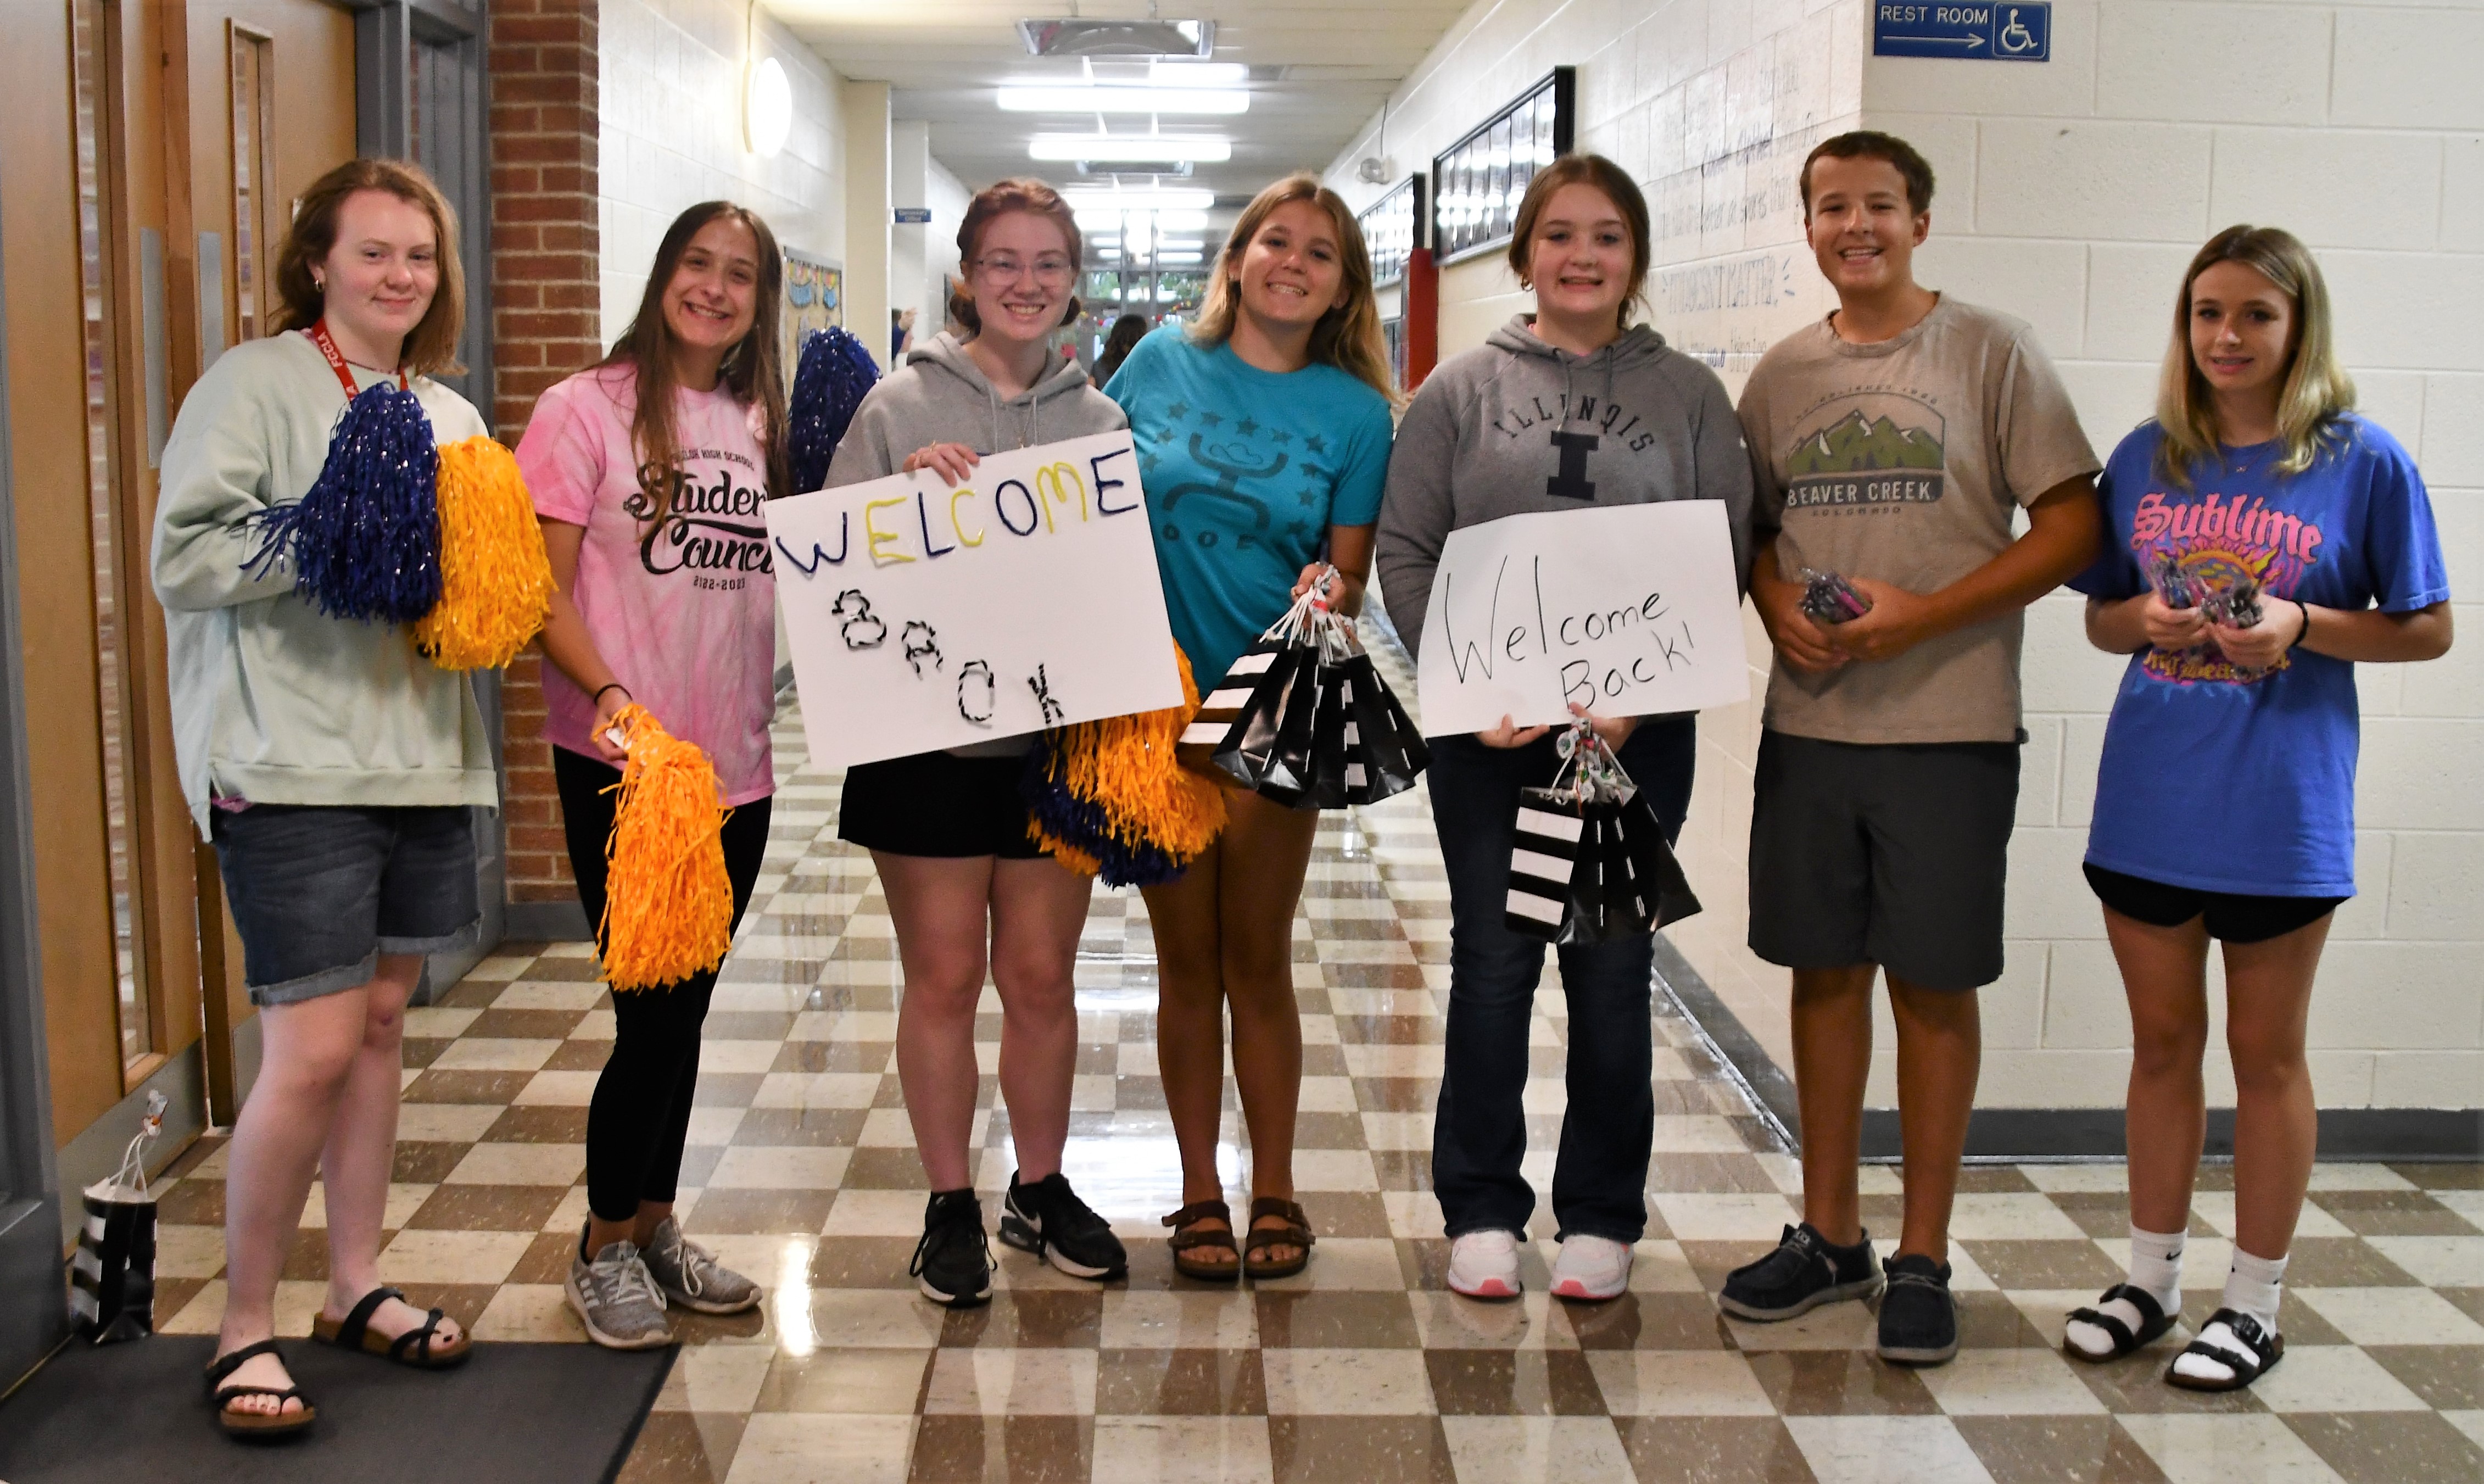 Student Council welcoming staff on first day of school